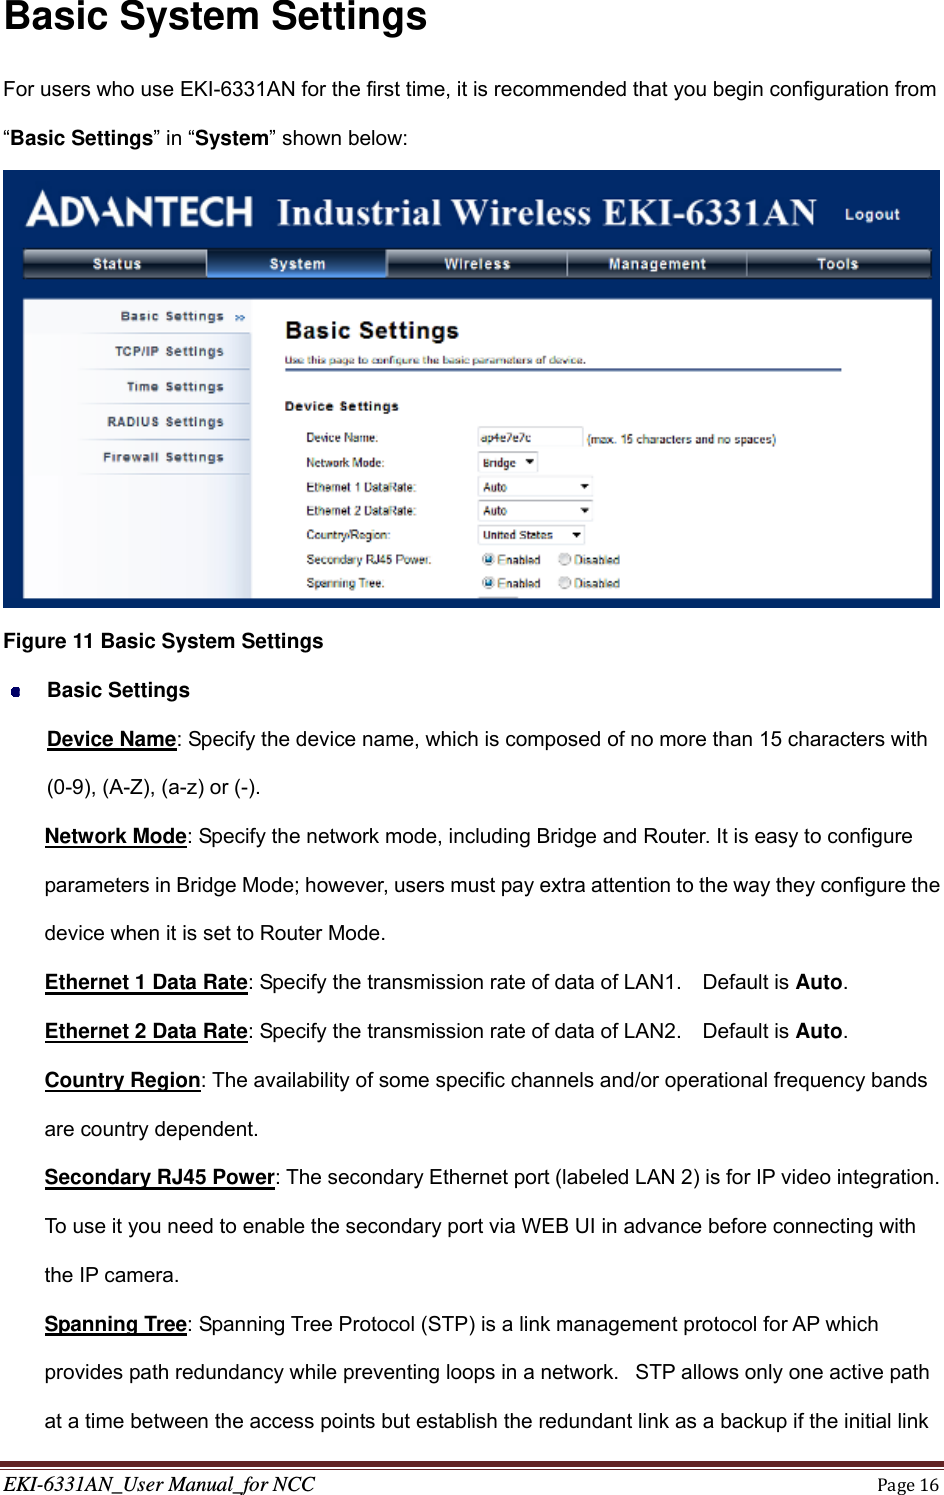 EKI-6331AN_User Manual_for NCCPage16Basic System Settings For users who use EKI-6331AN for the first time, it is recommended that you begin configuration from “Basic Settings” in “System” shown below:  Figure 11 Basic System Settings  Basic Settings Device Name: Specify the device name, which is composed of no more than 15 characters with (0-9), (A-Z), (a-z) or (-). Network Mode: Specify the network mode, including Bridge and Router. It is easy to configure parameters in Bridge Mode; however, users must pay extra attention to the way they configure the device when it is set to Router Mode. Ethernet 1 Data Rate: Specify the transmission rate of data of LAN1.    Default is Auto. Ethernet 2 Data Rate: Specify the transmission rate of data of LAN2.    Default is Auto. Country Region: The availability of some specific channels and/or operational frequency bands are country dependent. Secondary RJ45 Power: The secondary Ethernet port (labeled LAN 2) is for IP video integration.   To use it you need to enable the secondary port via WEB UI in advance before connecting with the IP camera. Spanning Tree: Spanning Tree Protocol (STP) is a link management protocol for AP which provides path redundancy while preventing loops in a network.   STP allows only one active path at a time between the access points but establish the redundant link as a backup if the initial link 